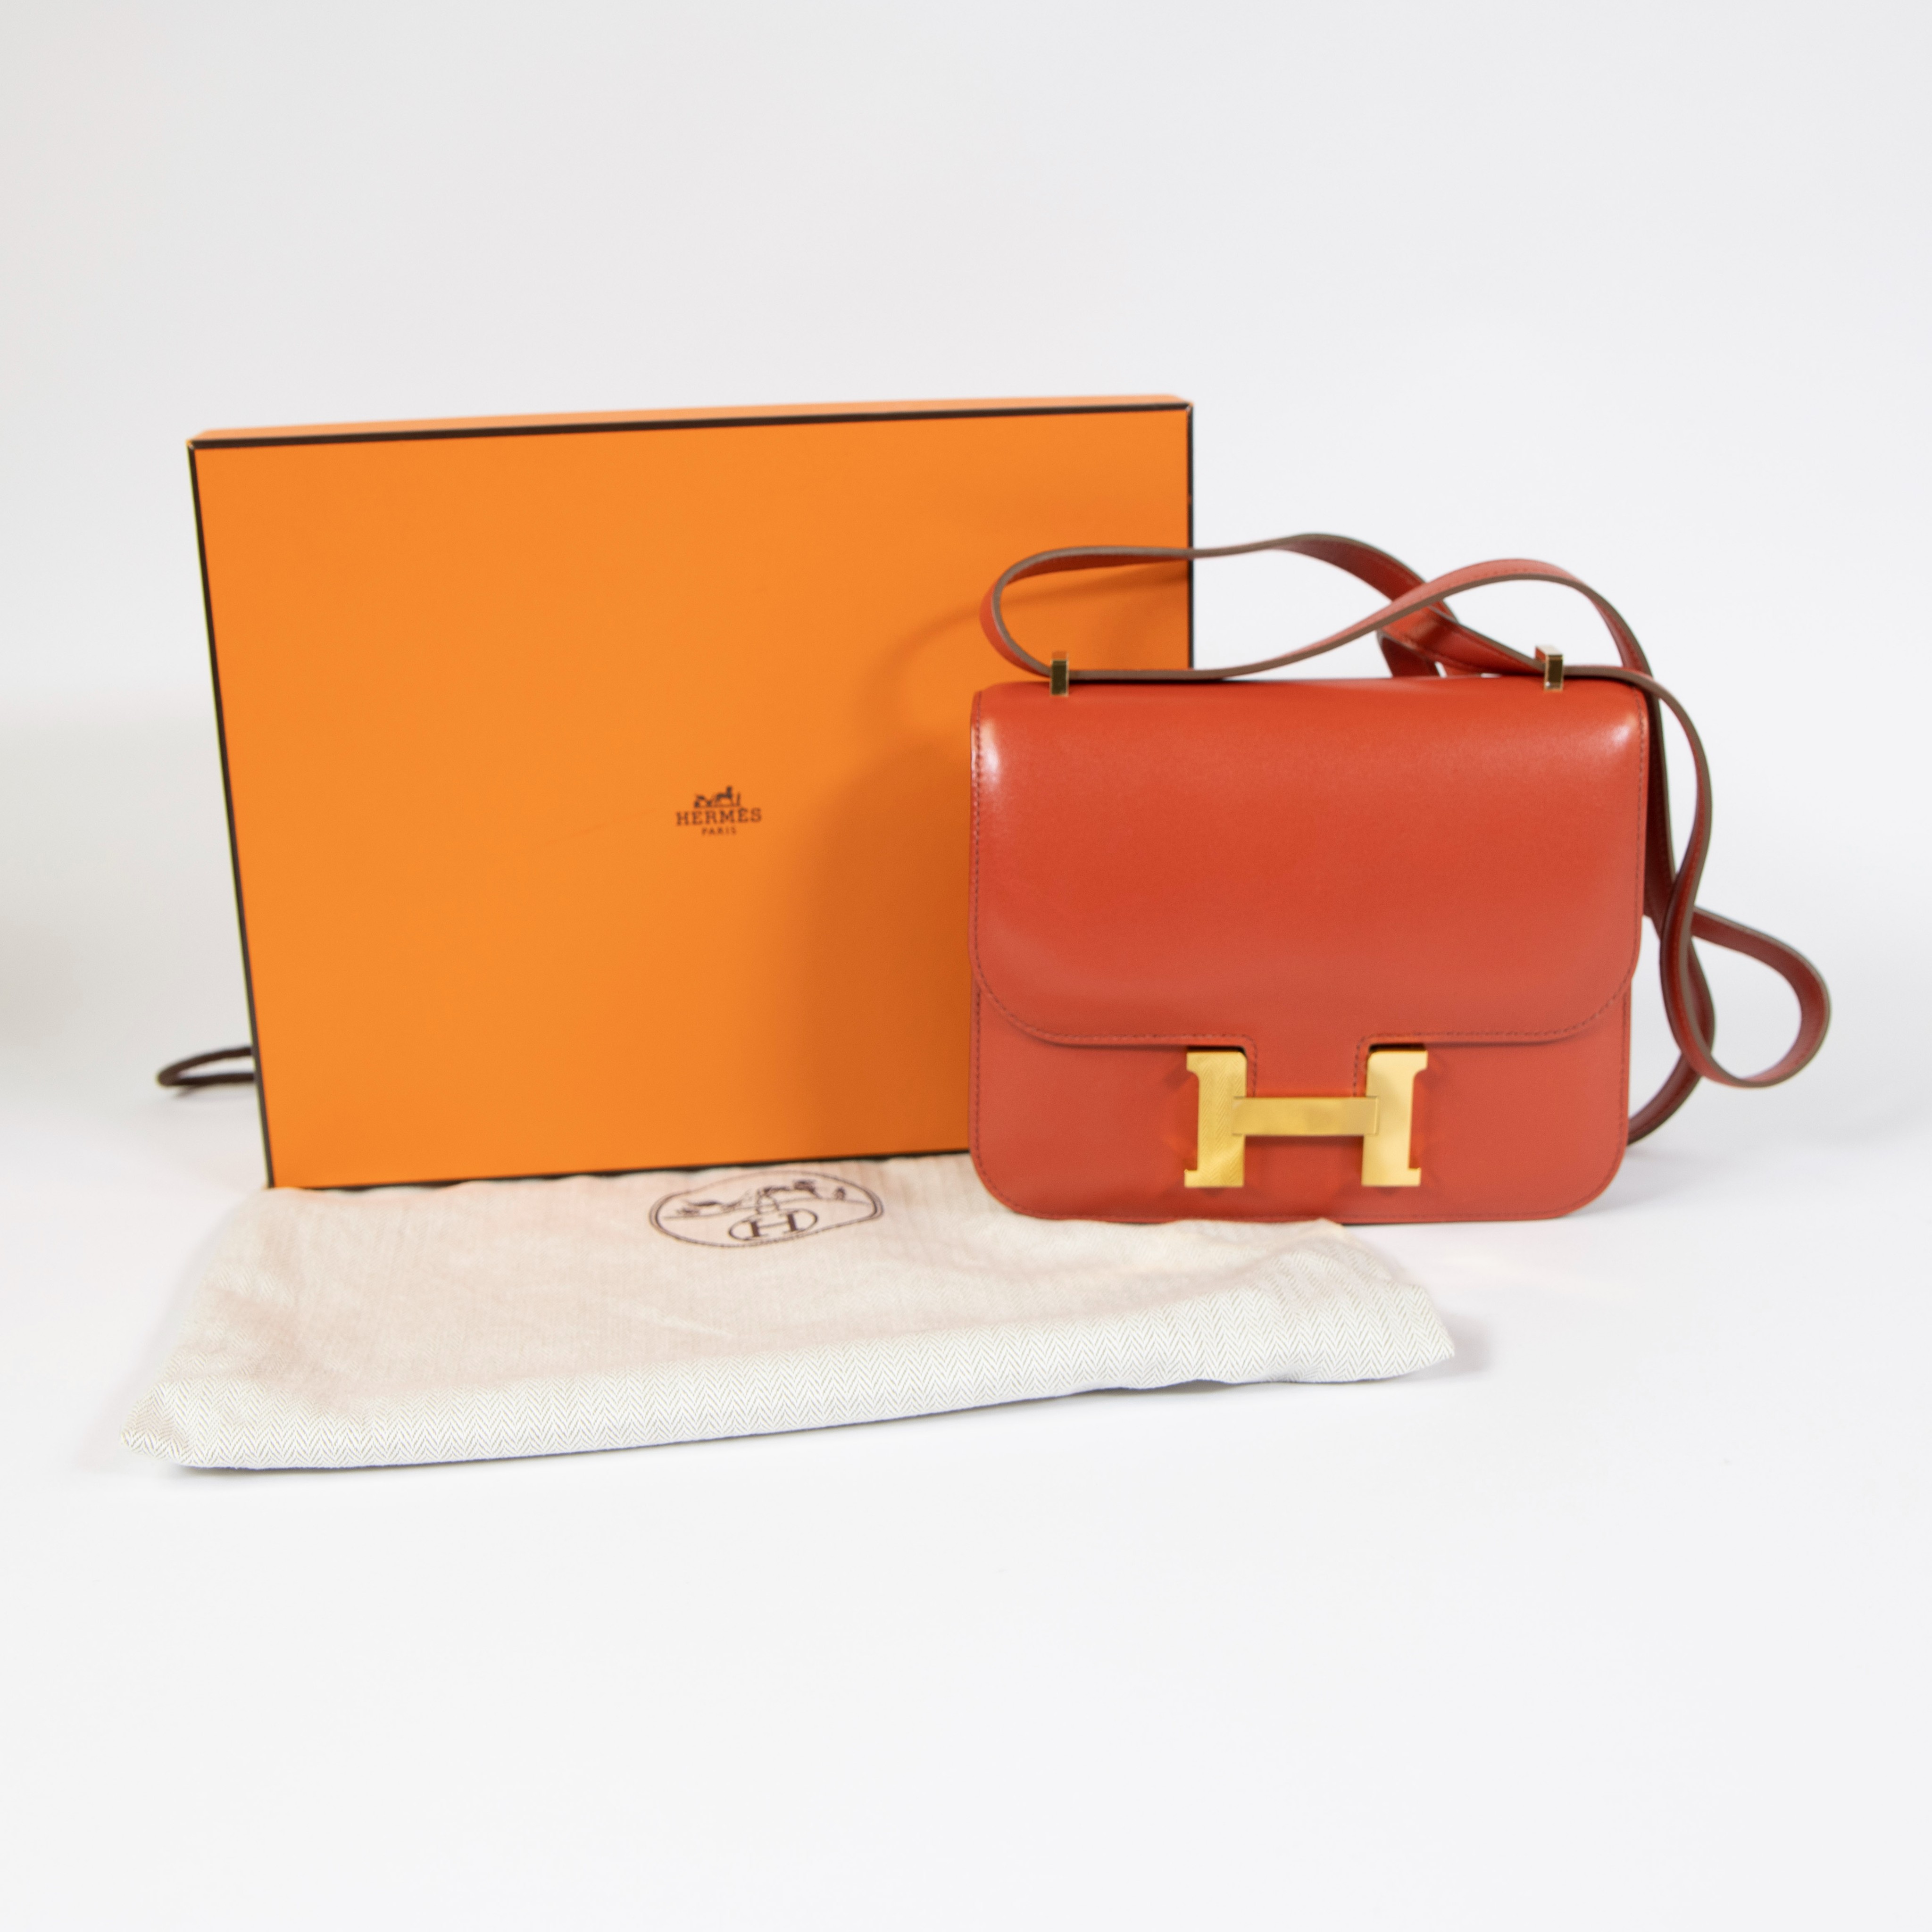 Hermes leather handback model Constance coral color with original bag and box